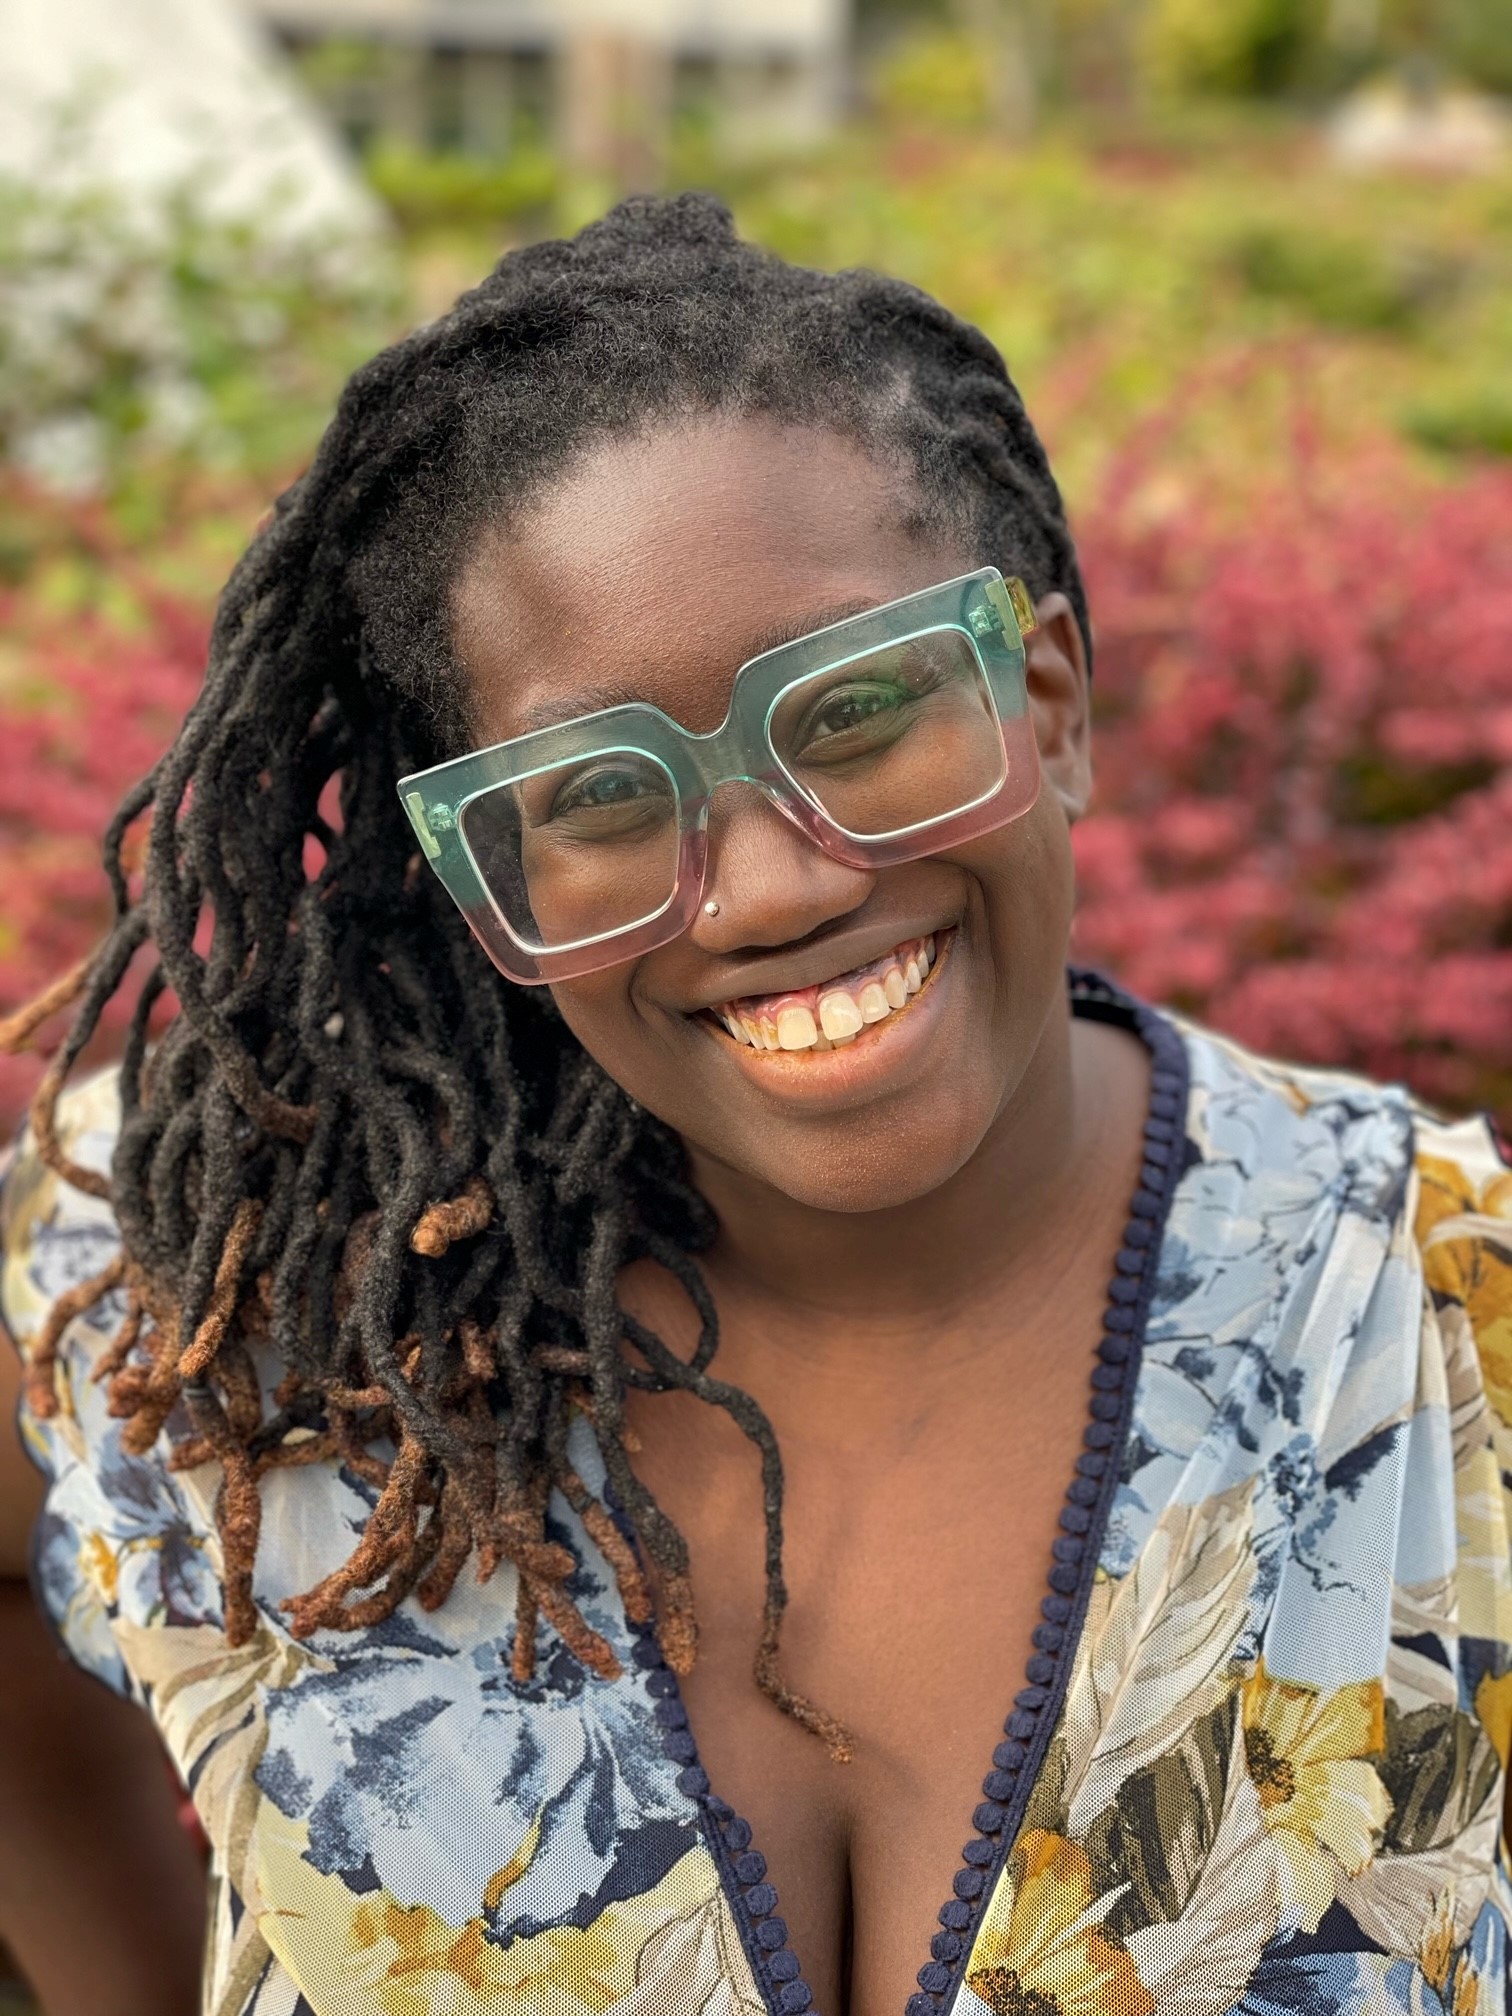 Image of Tolu Taiwo with blue and purple glasses smiling in front of a reddish bush.